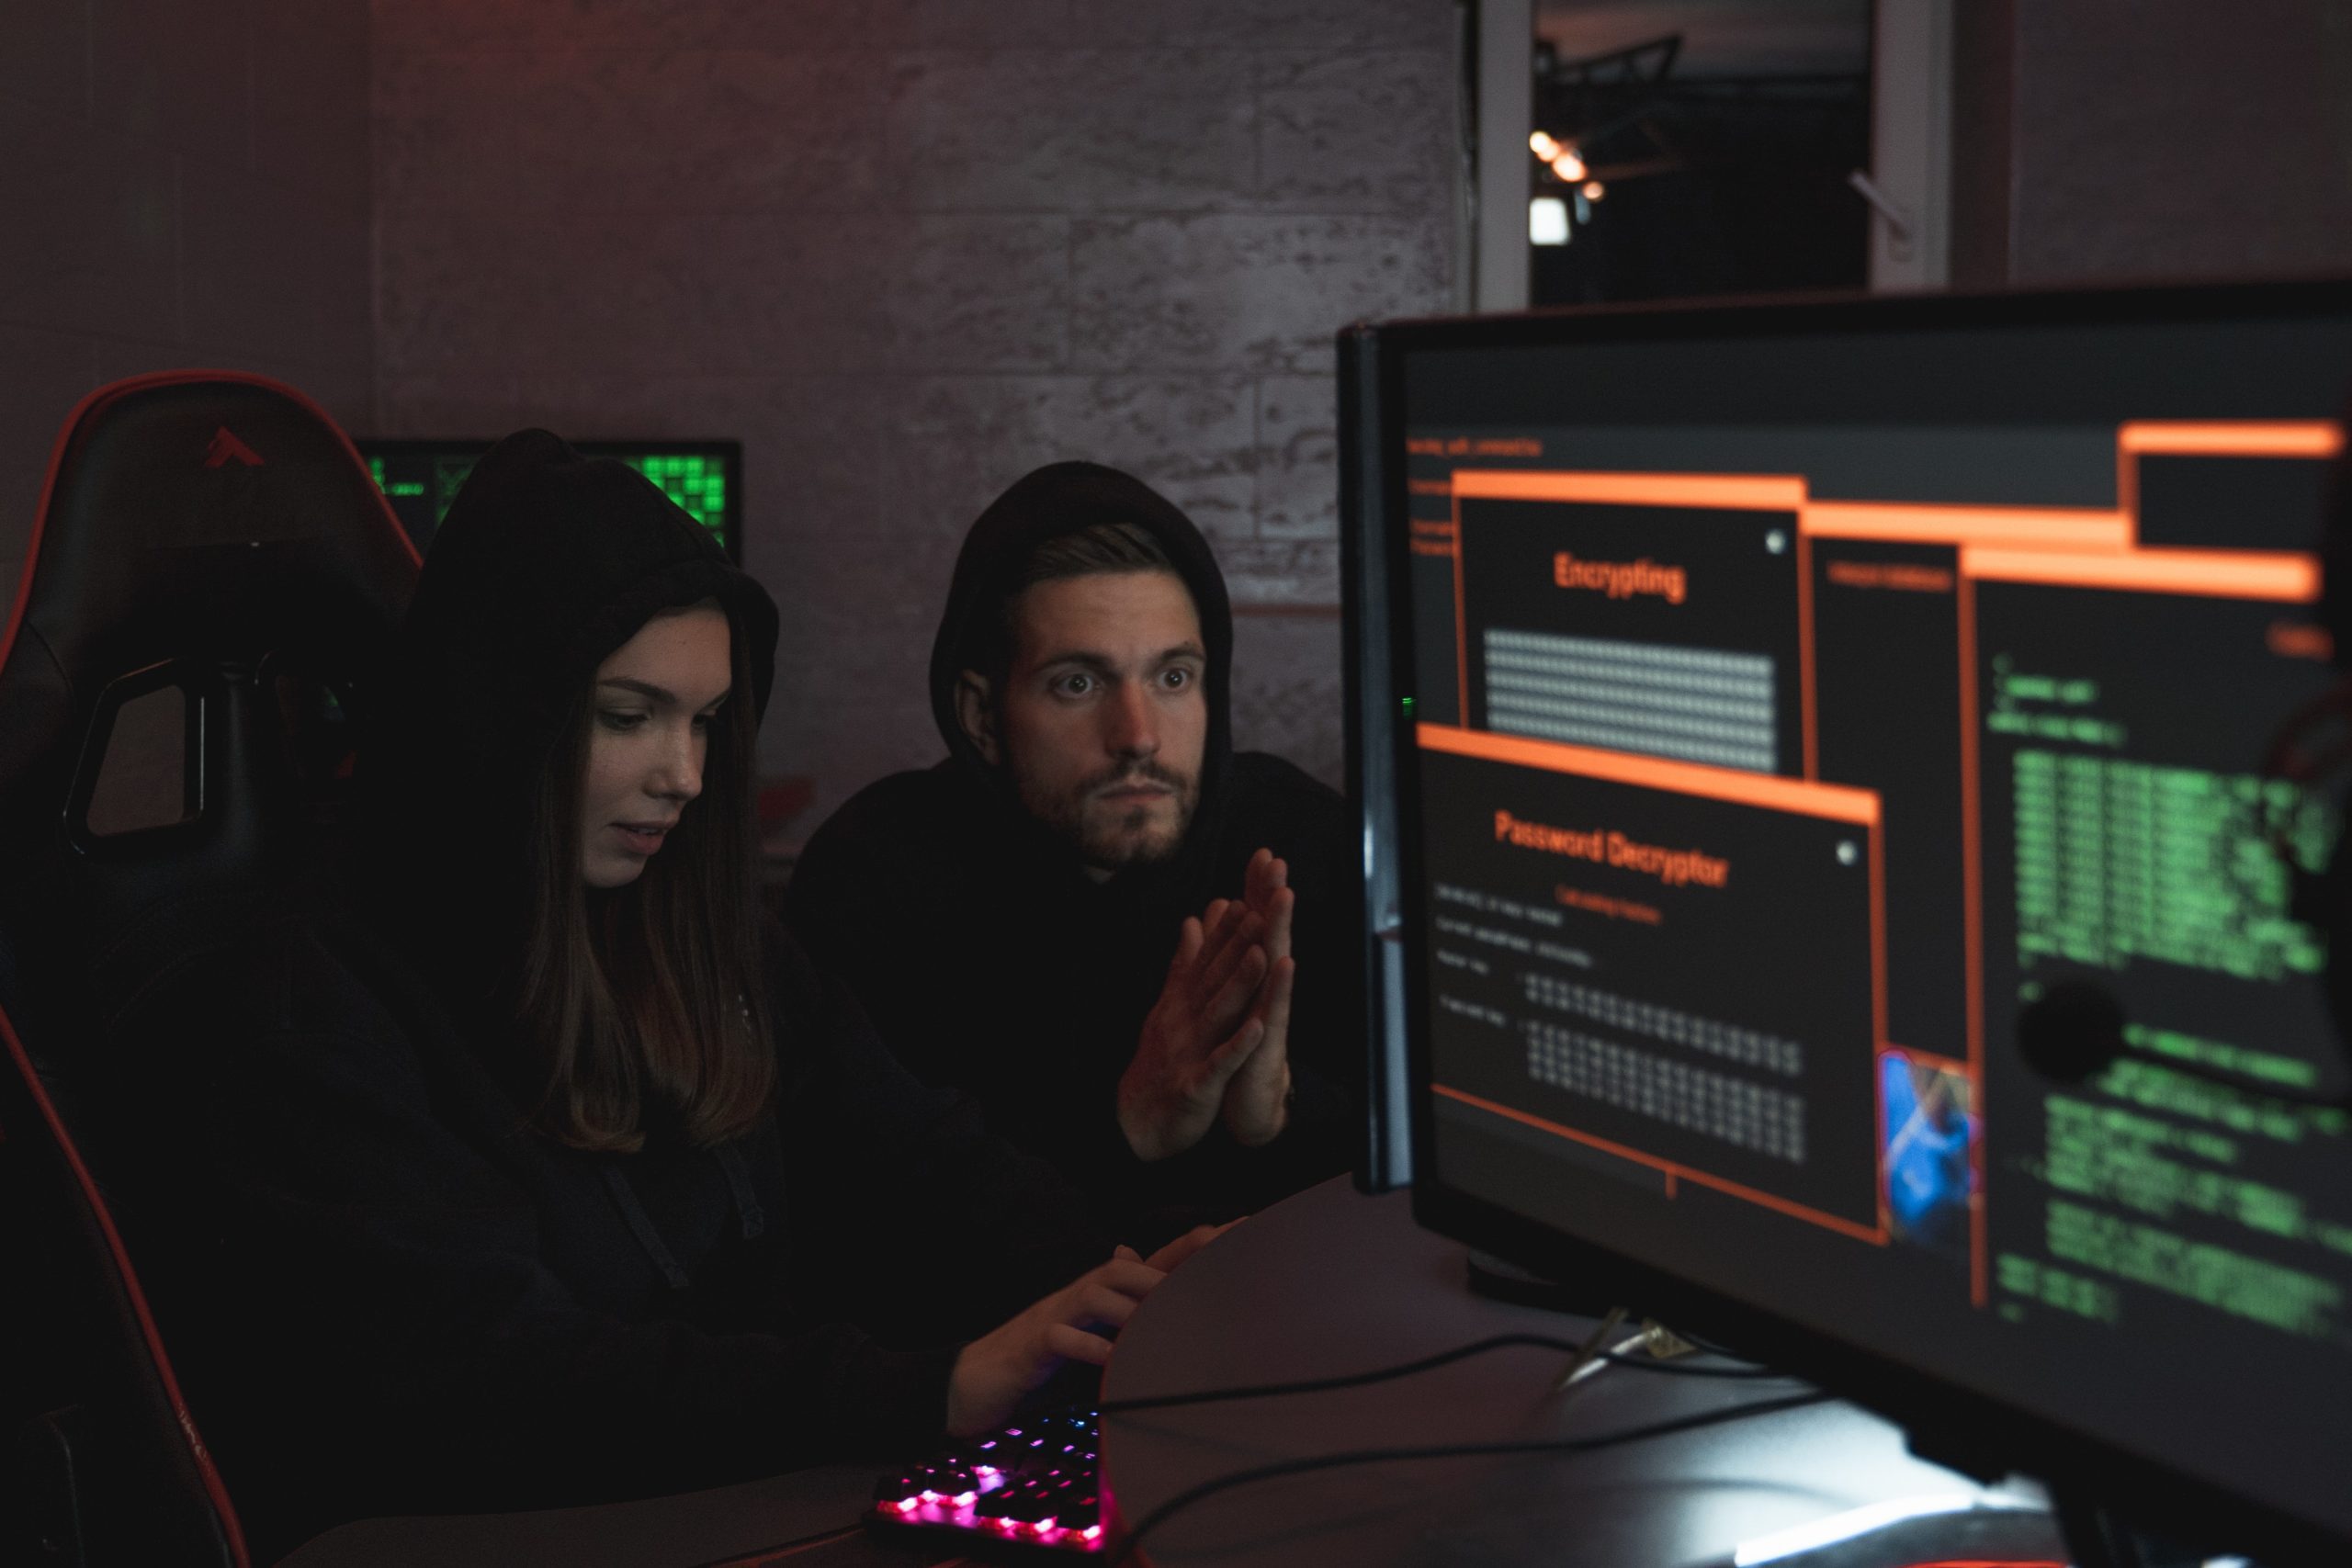 An image of two people looking at a set of displays, one with worried eyes. Ransomware attacks can be severe for organizations but luckily backups play a crucial role in restoring lost or stolen network data. Sadly, backups aren't enough to fend off every angle of ransomware.